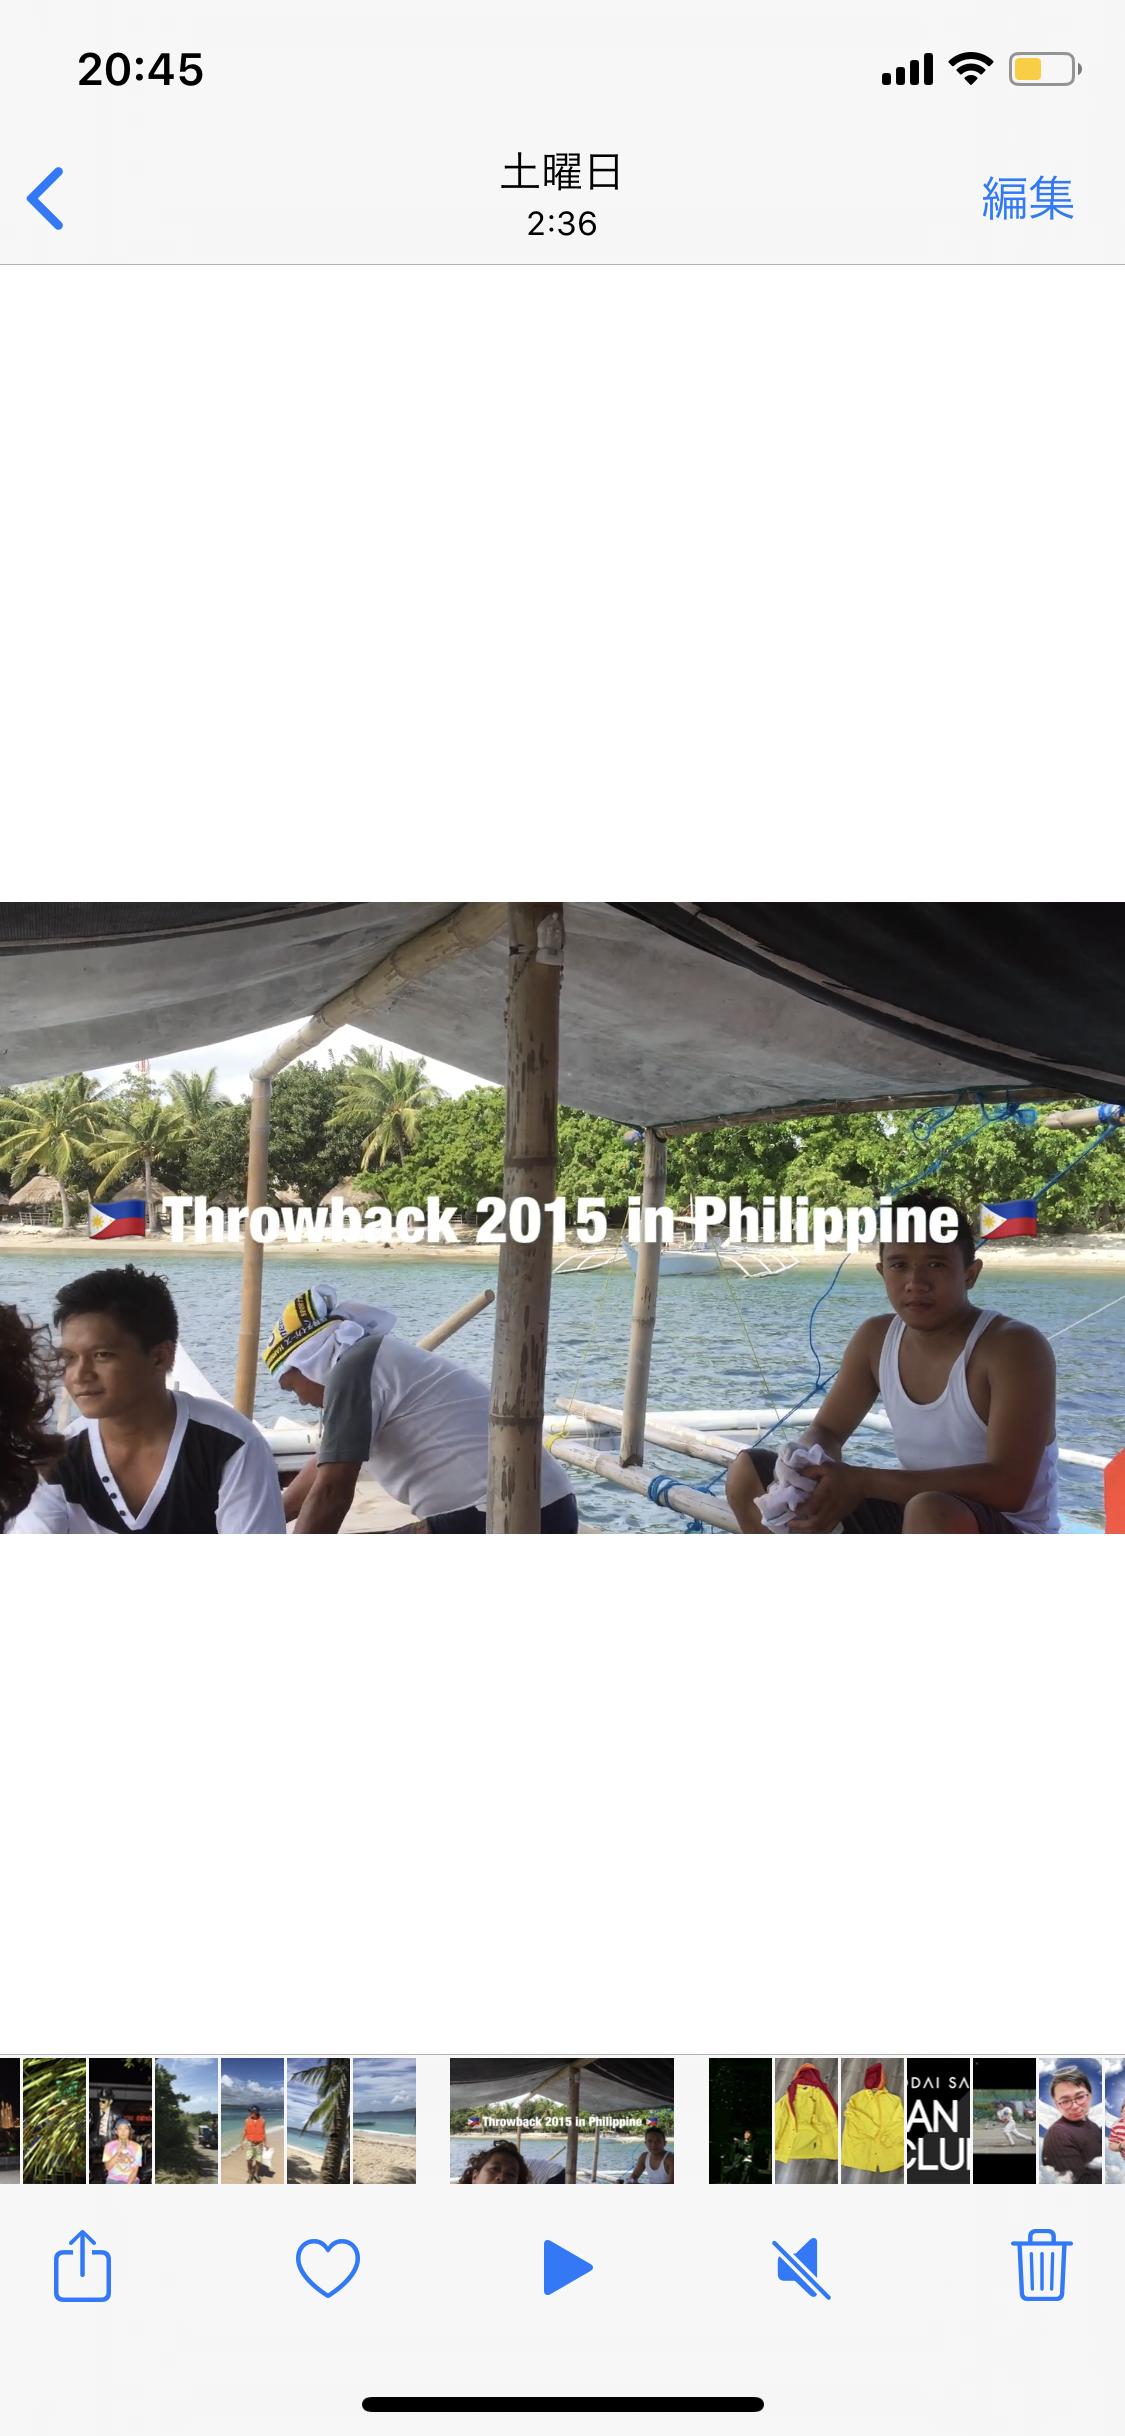 Throwback 2015 in Philippine